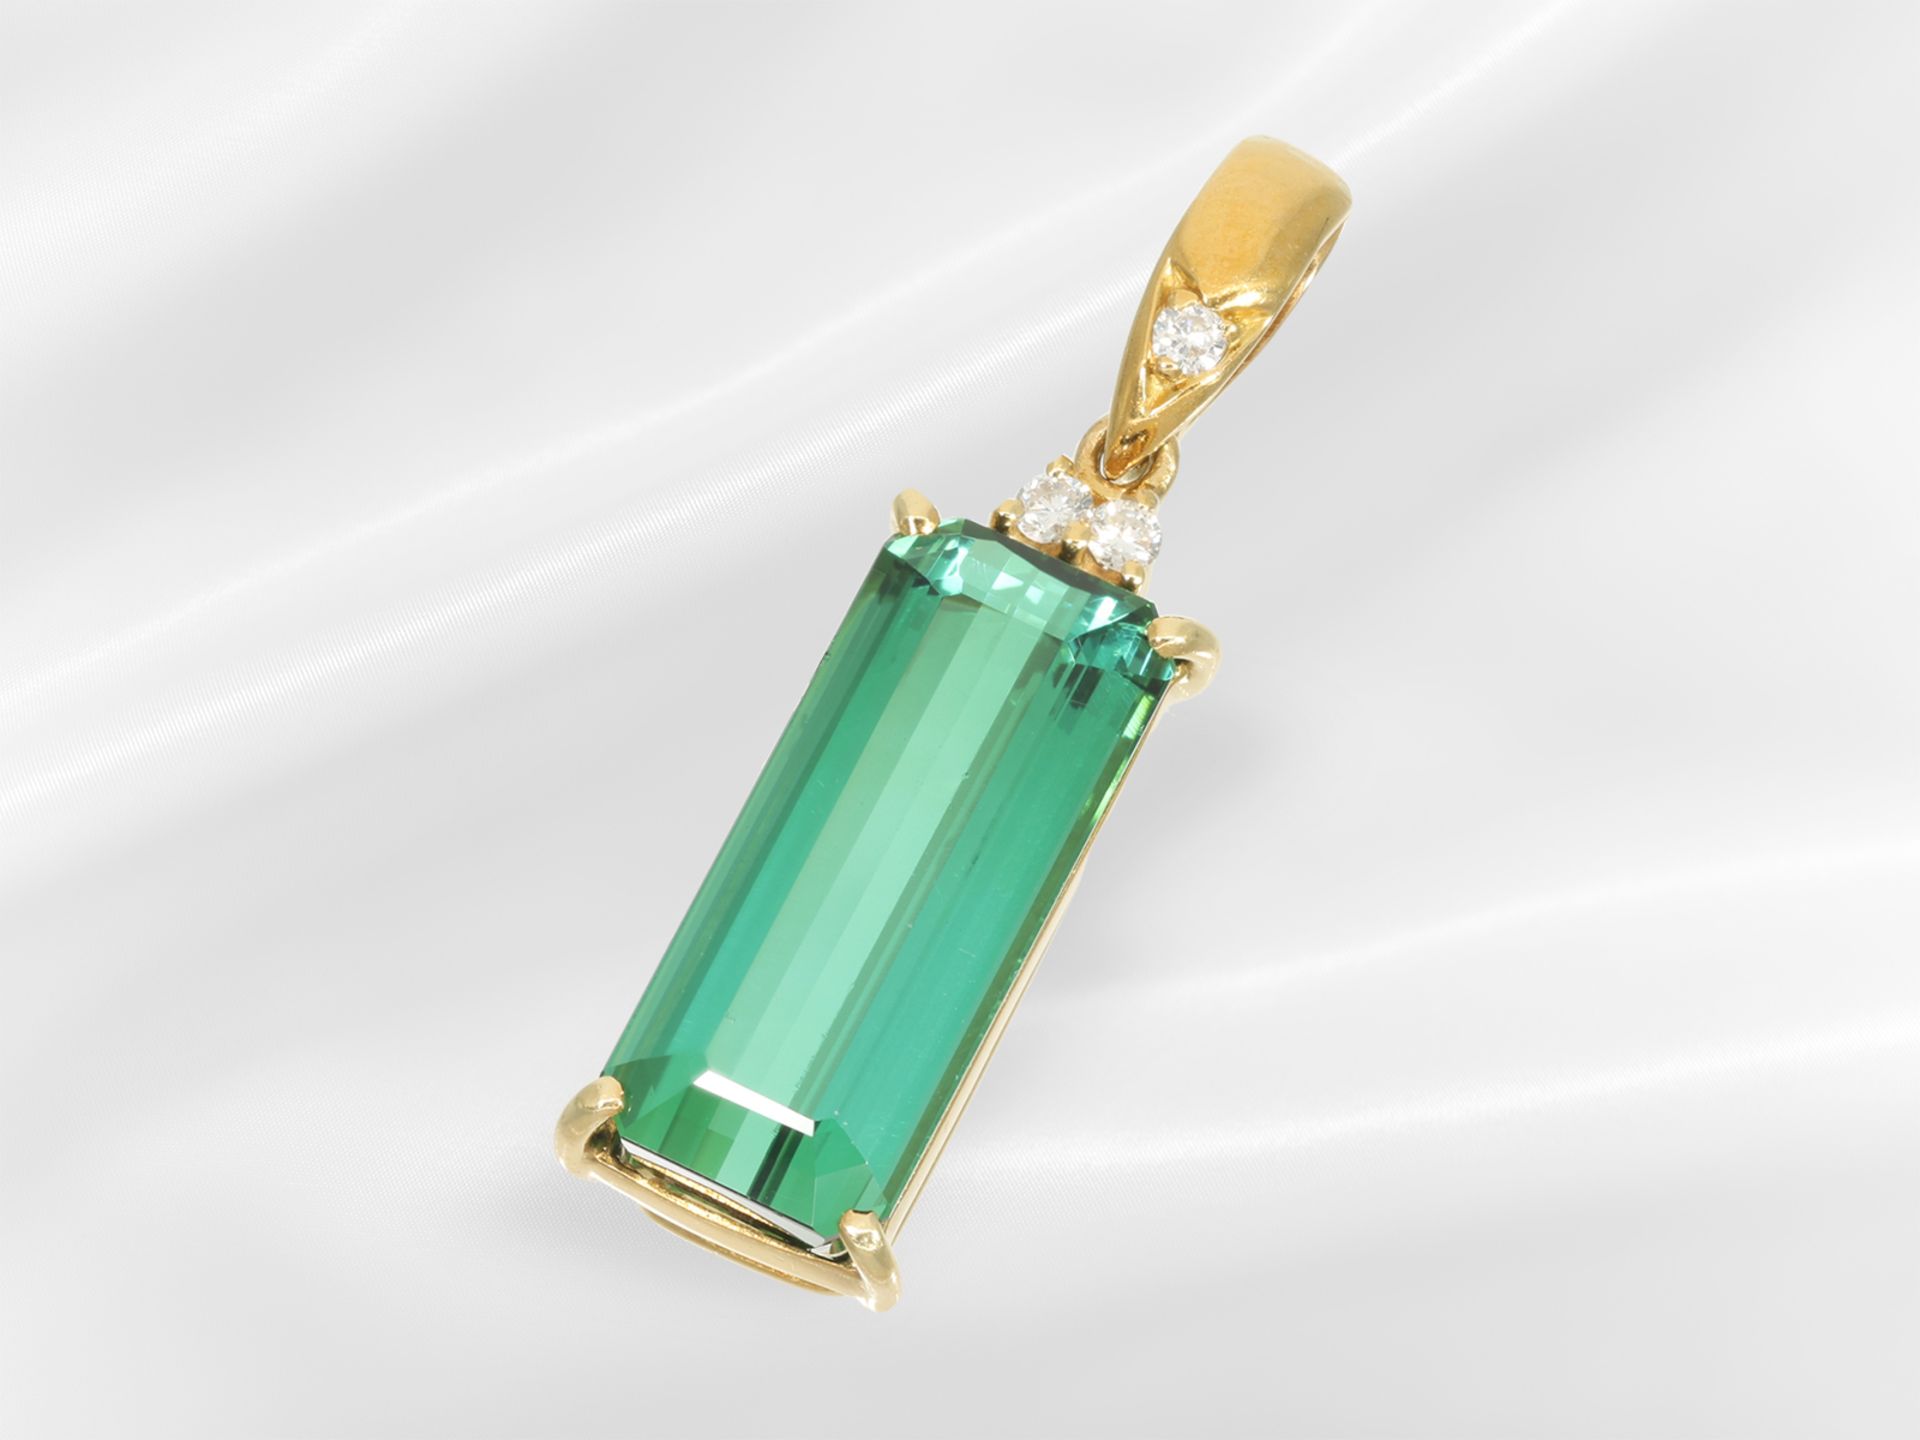 Pendant: goldsmith work with a fine tourmaline of approx. 8.77ct and brilliant-cut diamonds